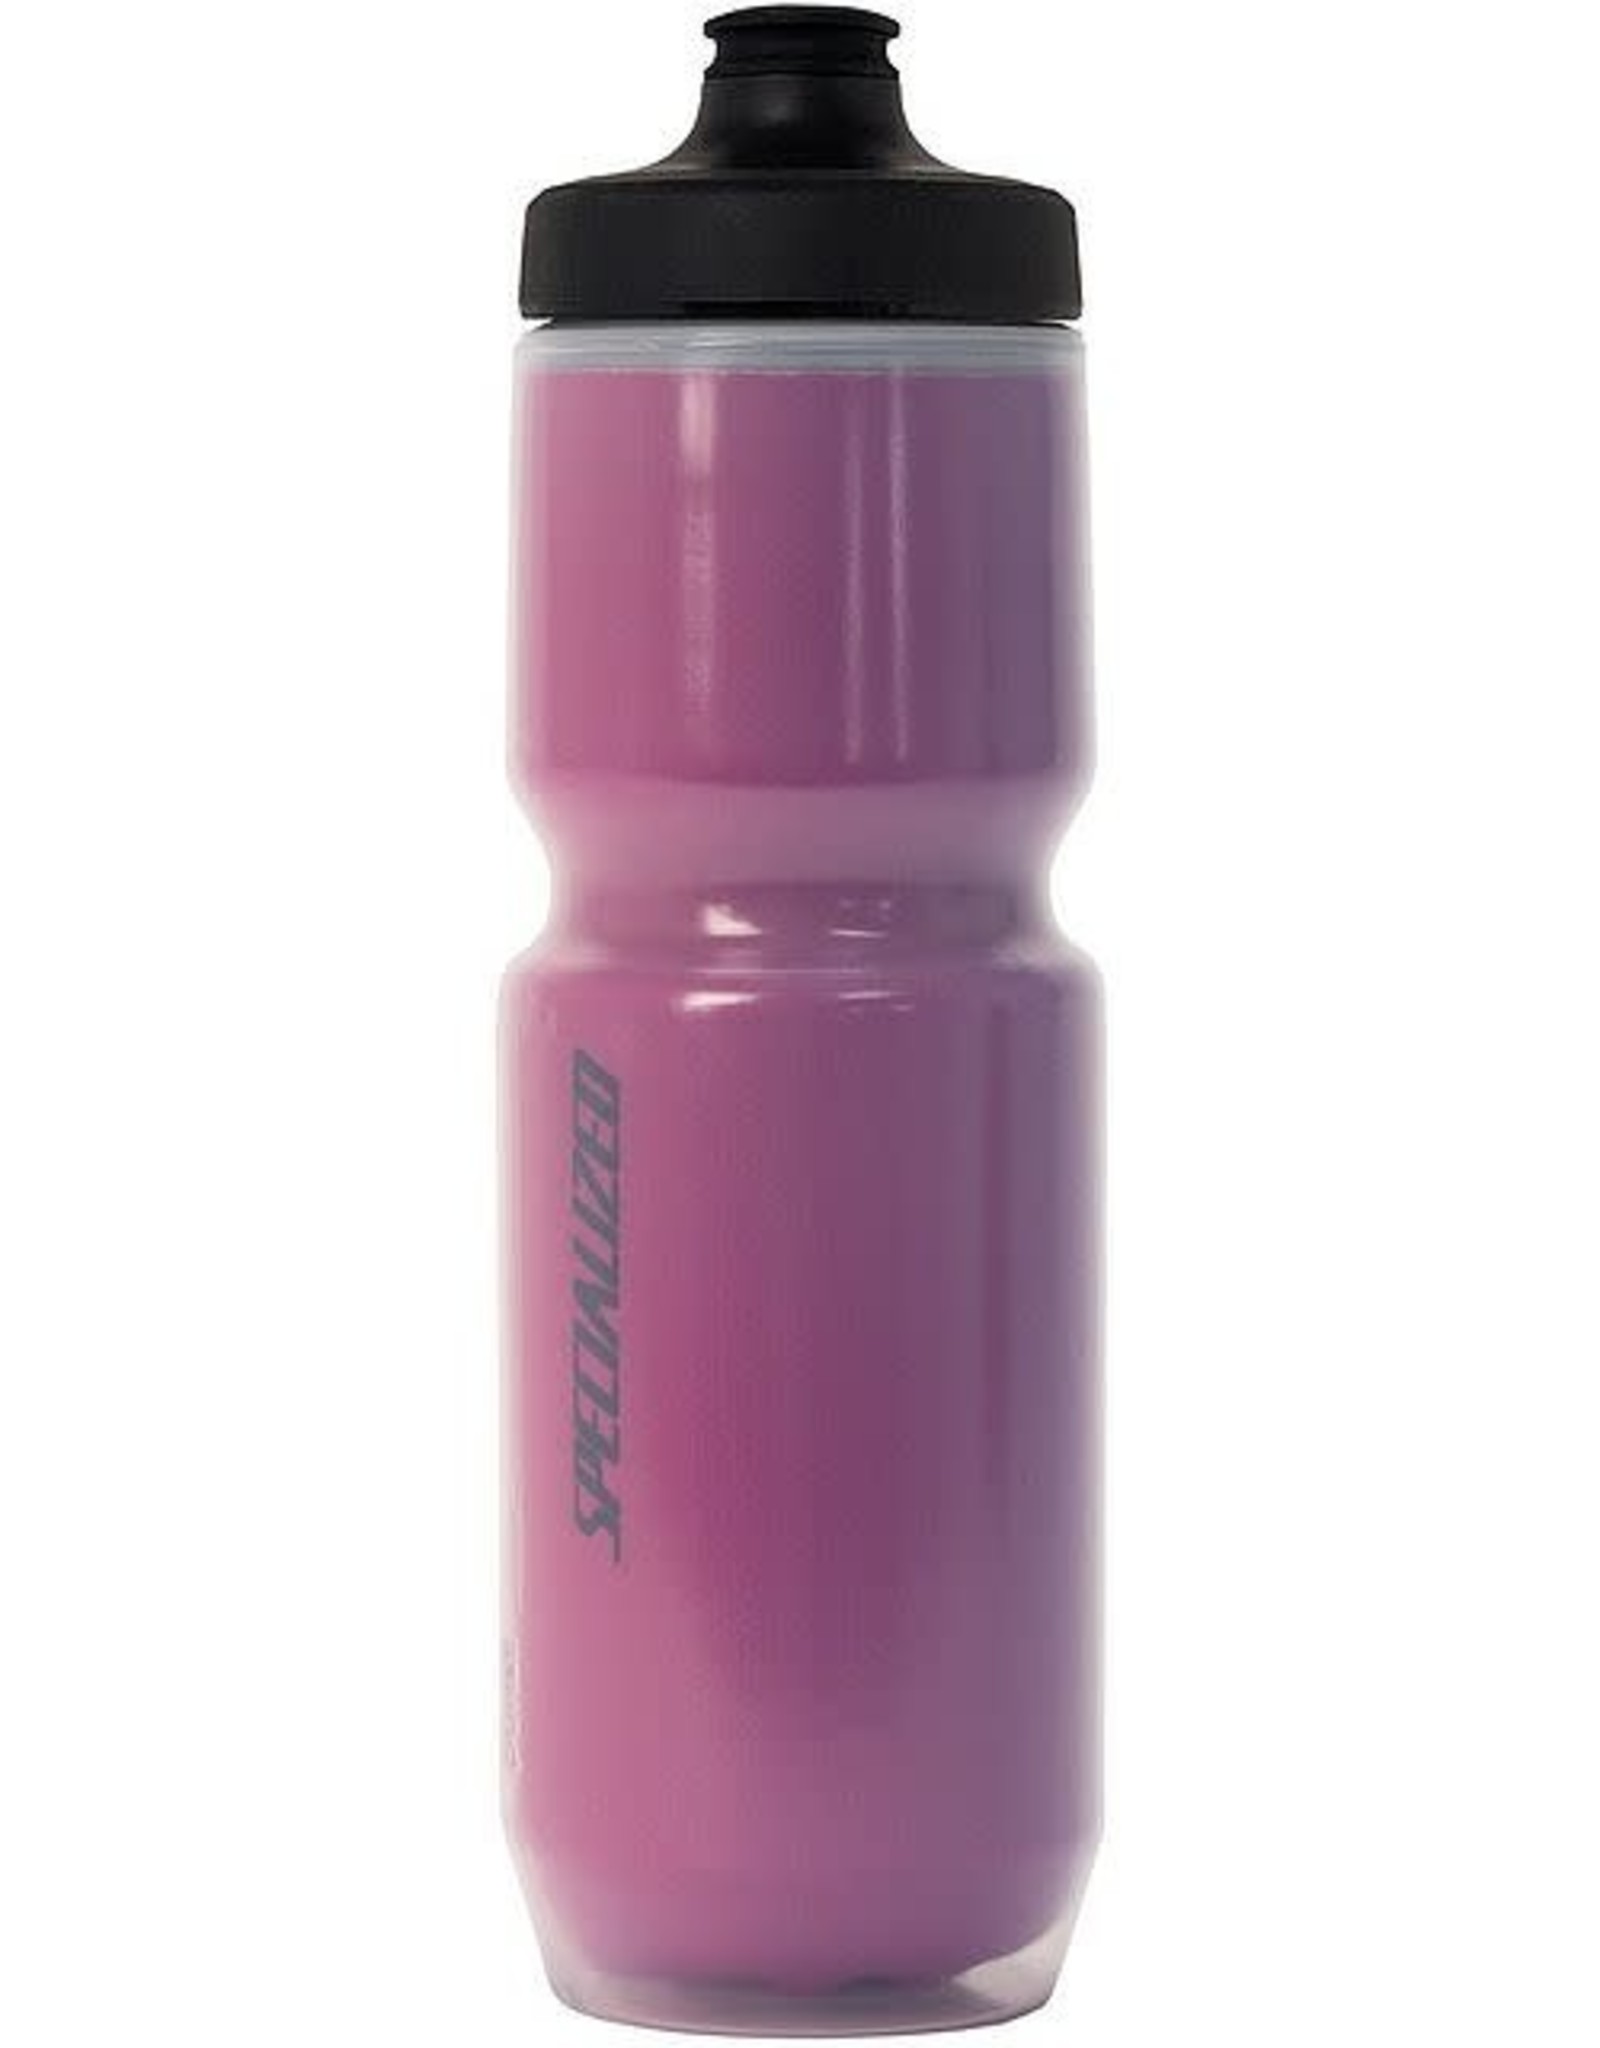 SPECIALIZED SPECIALIZED Water Bottle PURIST INSULATED CHROMATEK WATERGATE 23oz